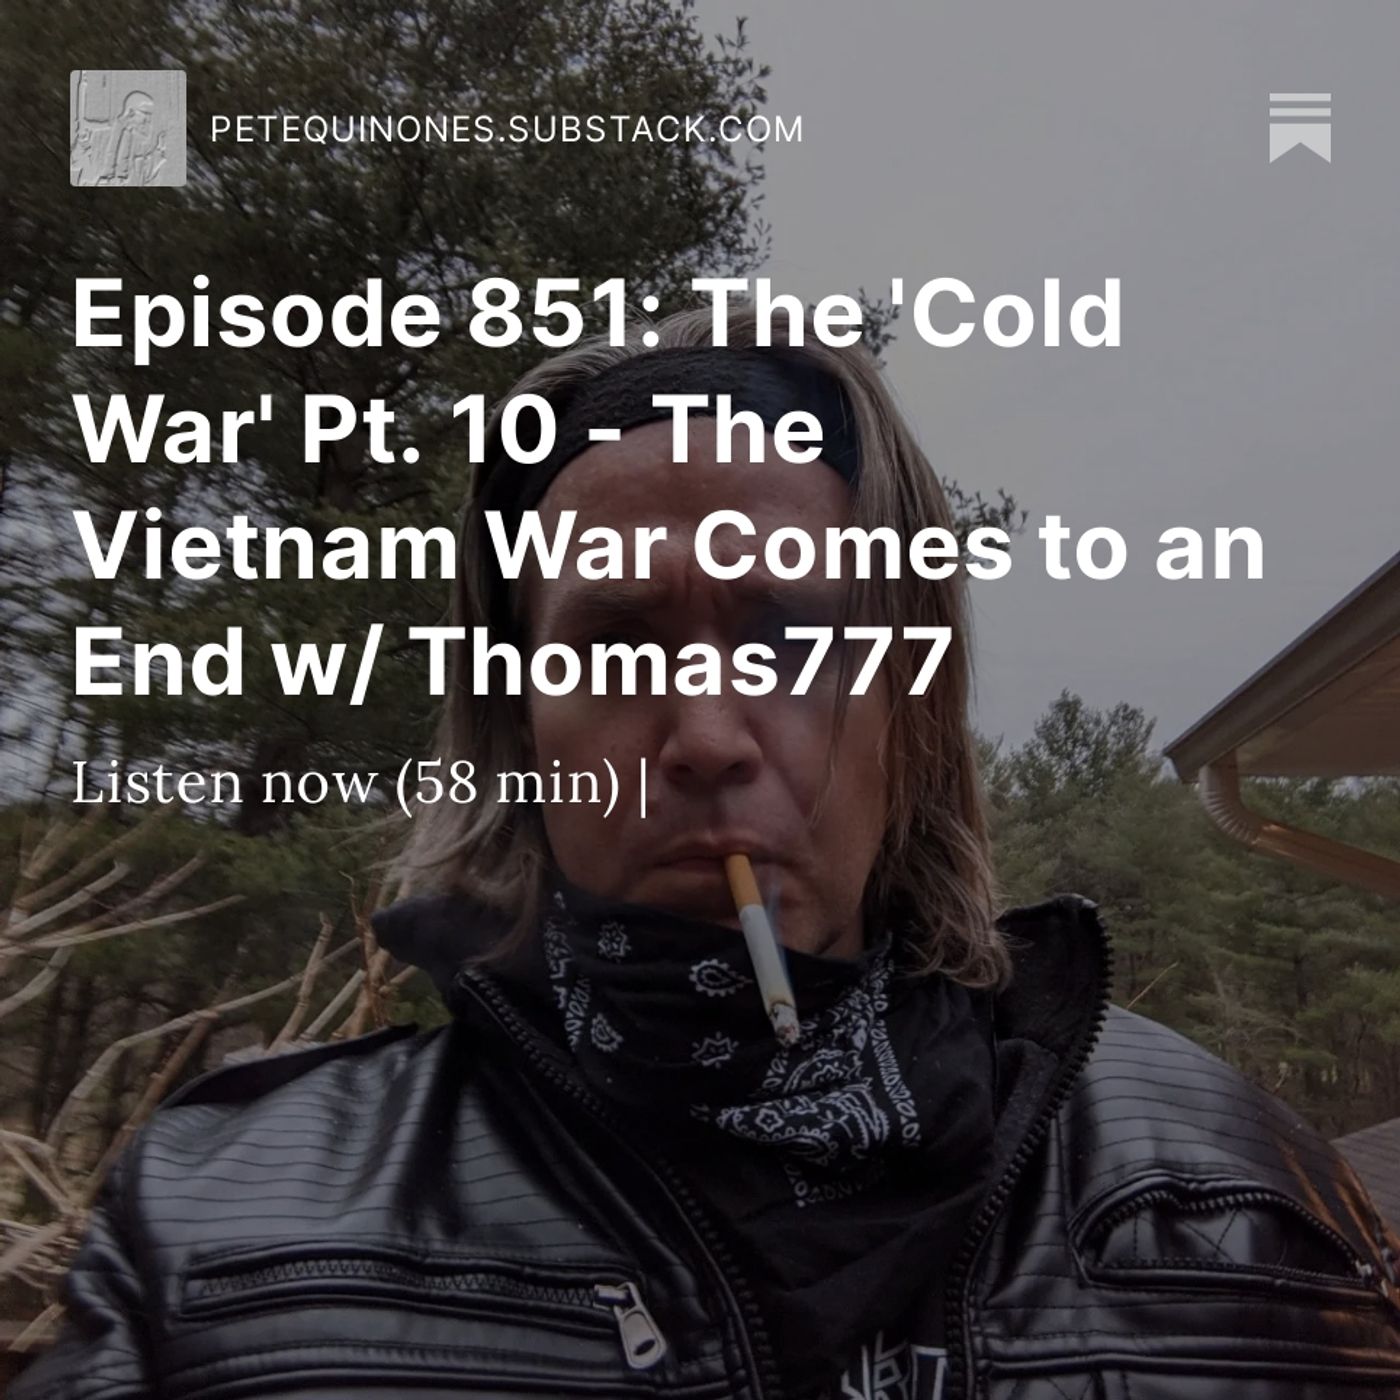 Episode 851: The 'Cold War' Pt. 10 - The Vietnam War Comes to an End w/ Thomas777